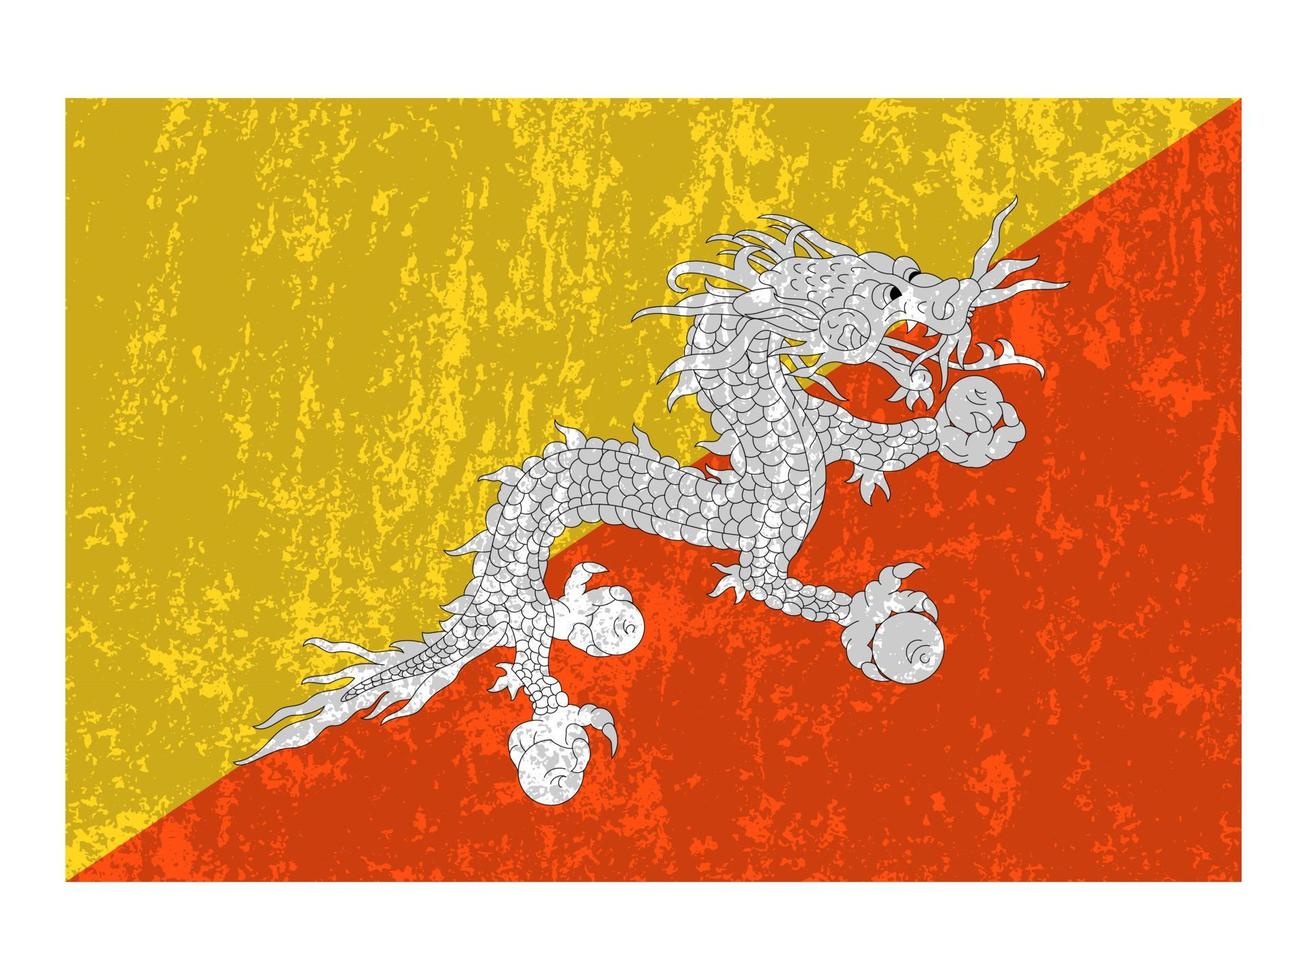 Bhutan grunge flag, official colors and proportion. Vector illustration.